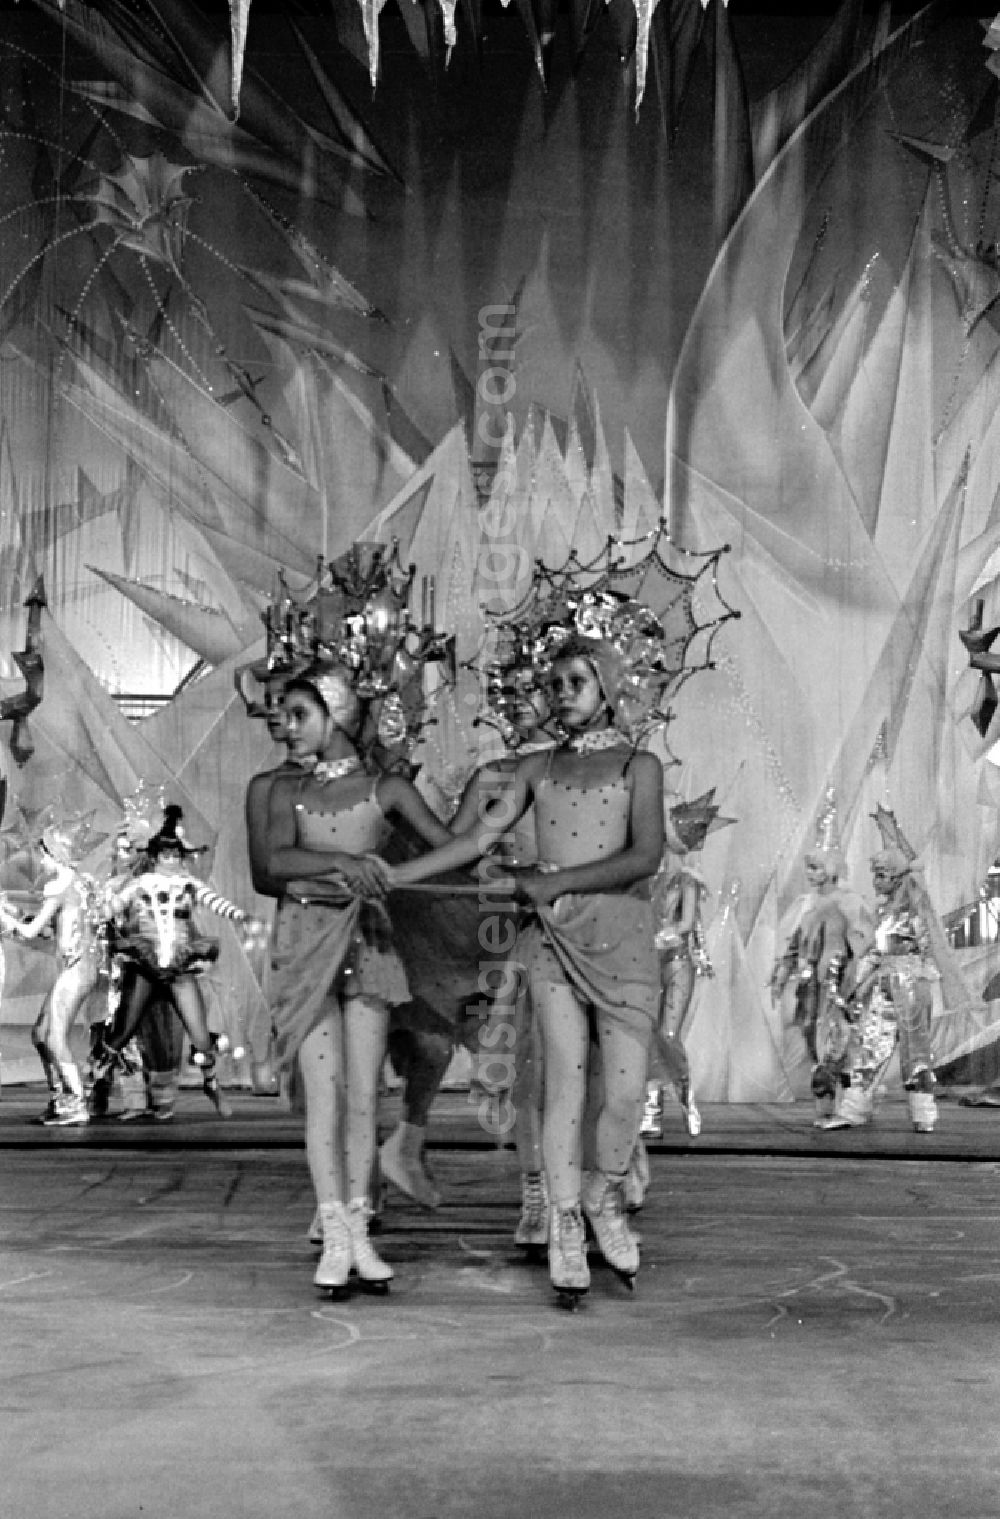 GDR image archive: Berlin - Actors and actors of a theater - scene and stage design Kinderrevue Regenbogen im Friedrichstadtpalast in the district Mitte in Berlin Eastberlin on the territory of the former GDR, German Democratic Republic